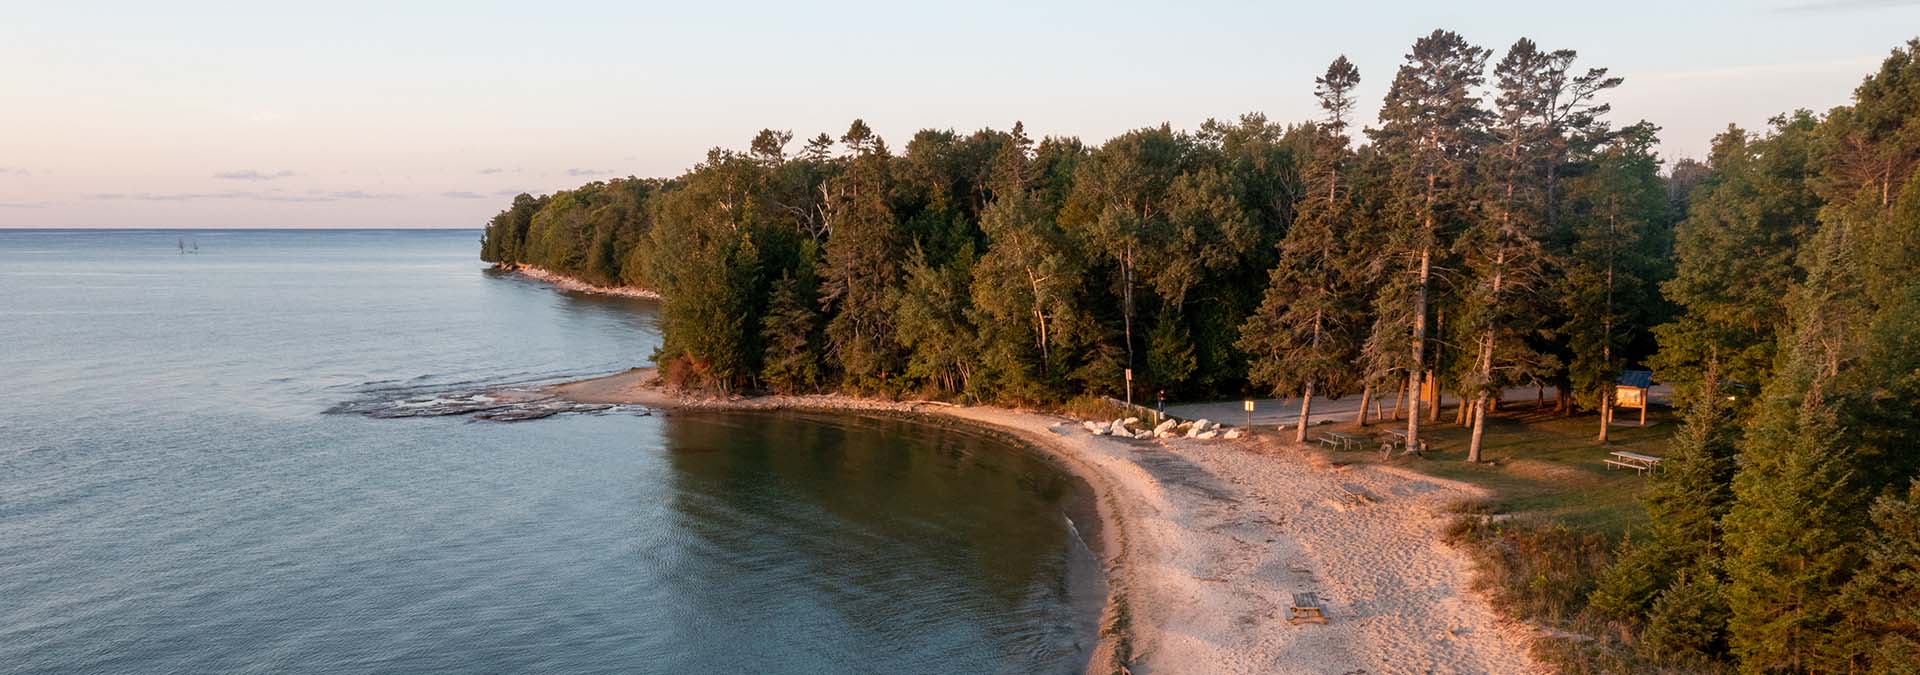 Lake Michigan with a tree-lined sandy beach shoreline.